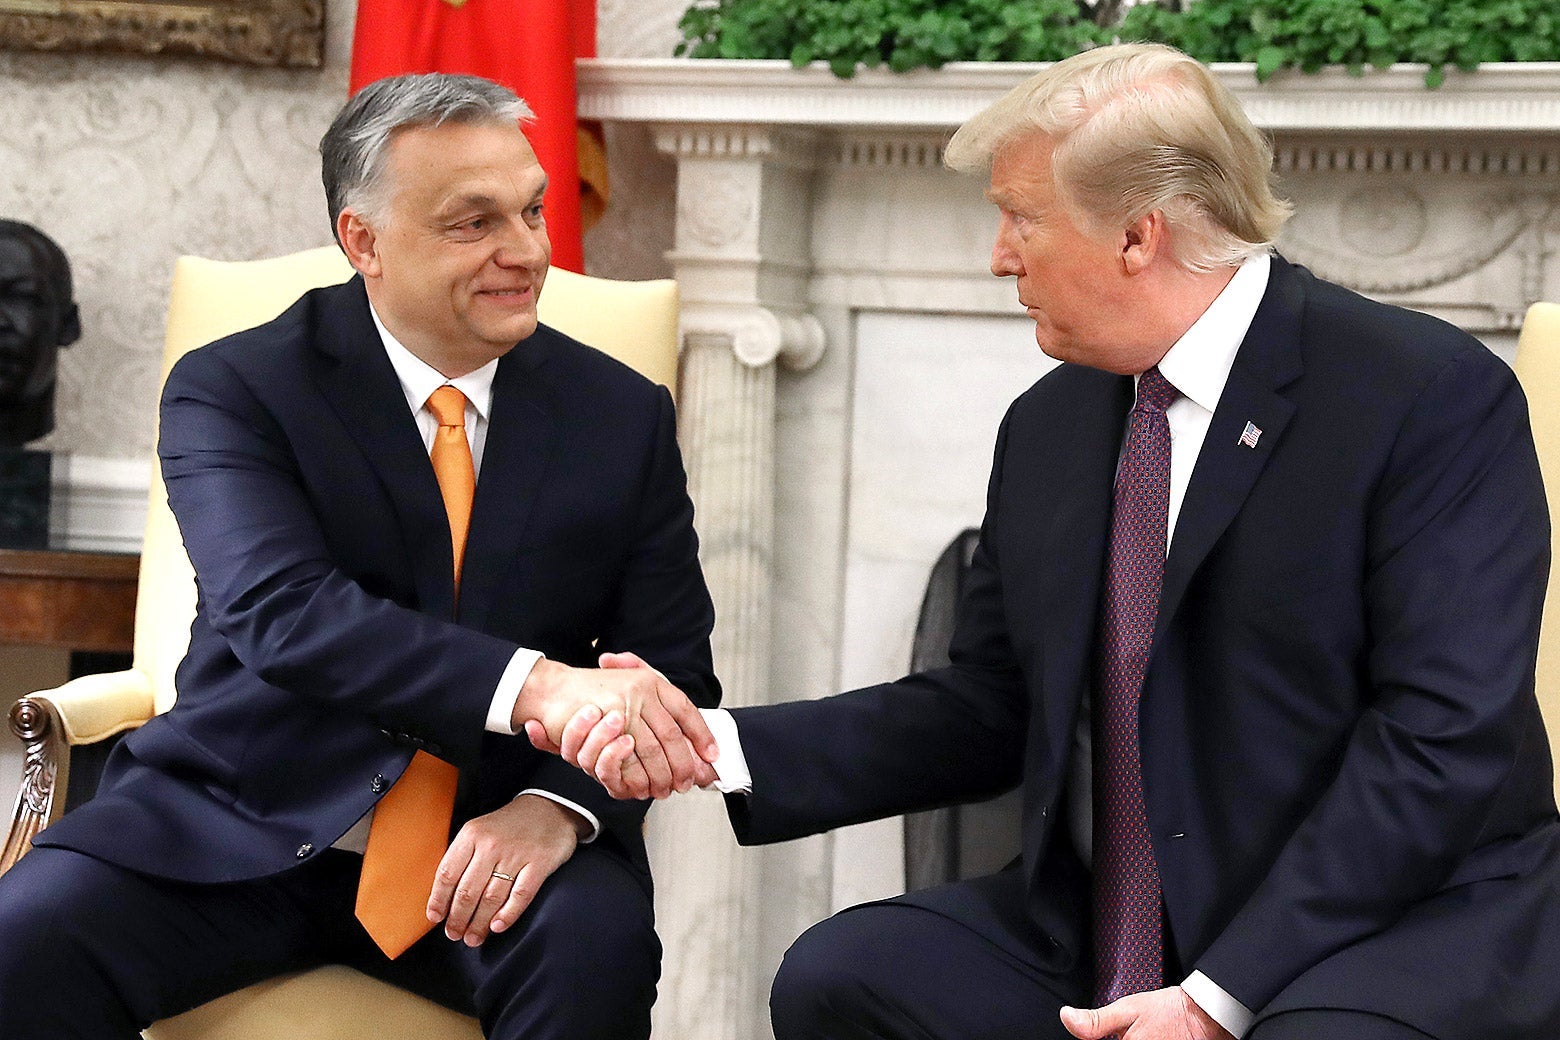 Donald Trump shakes hands with Viktor Orbán in the Oval Office.